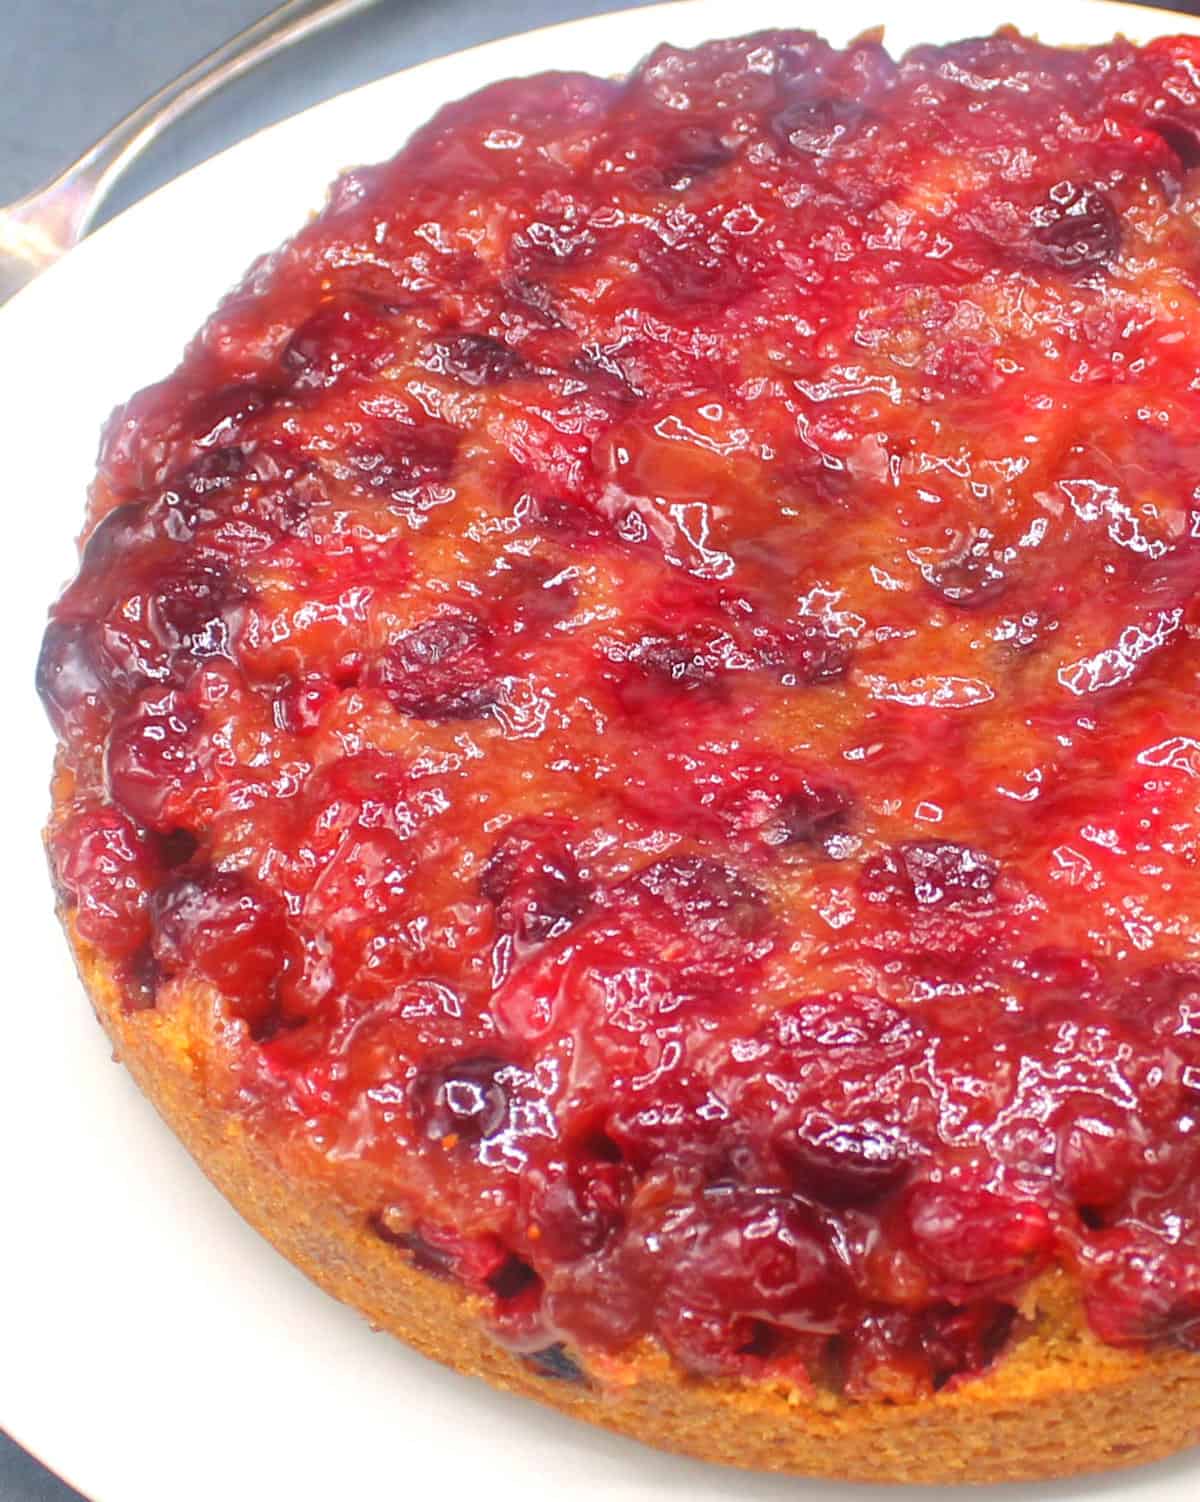 Vegan cranberry upside down cake on a white plate.